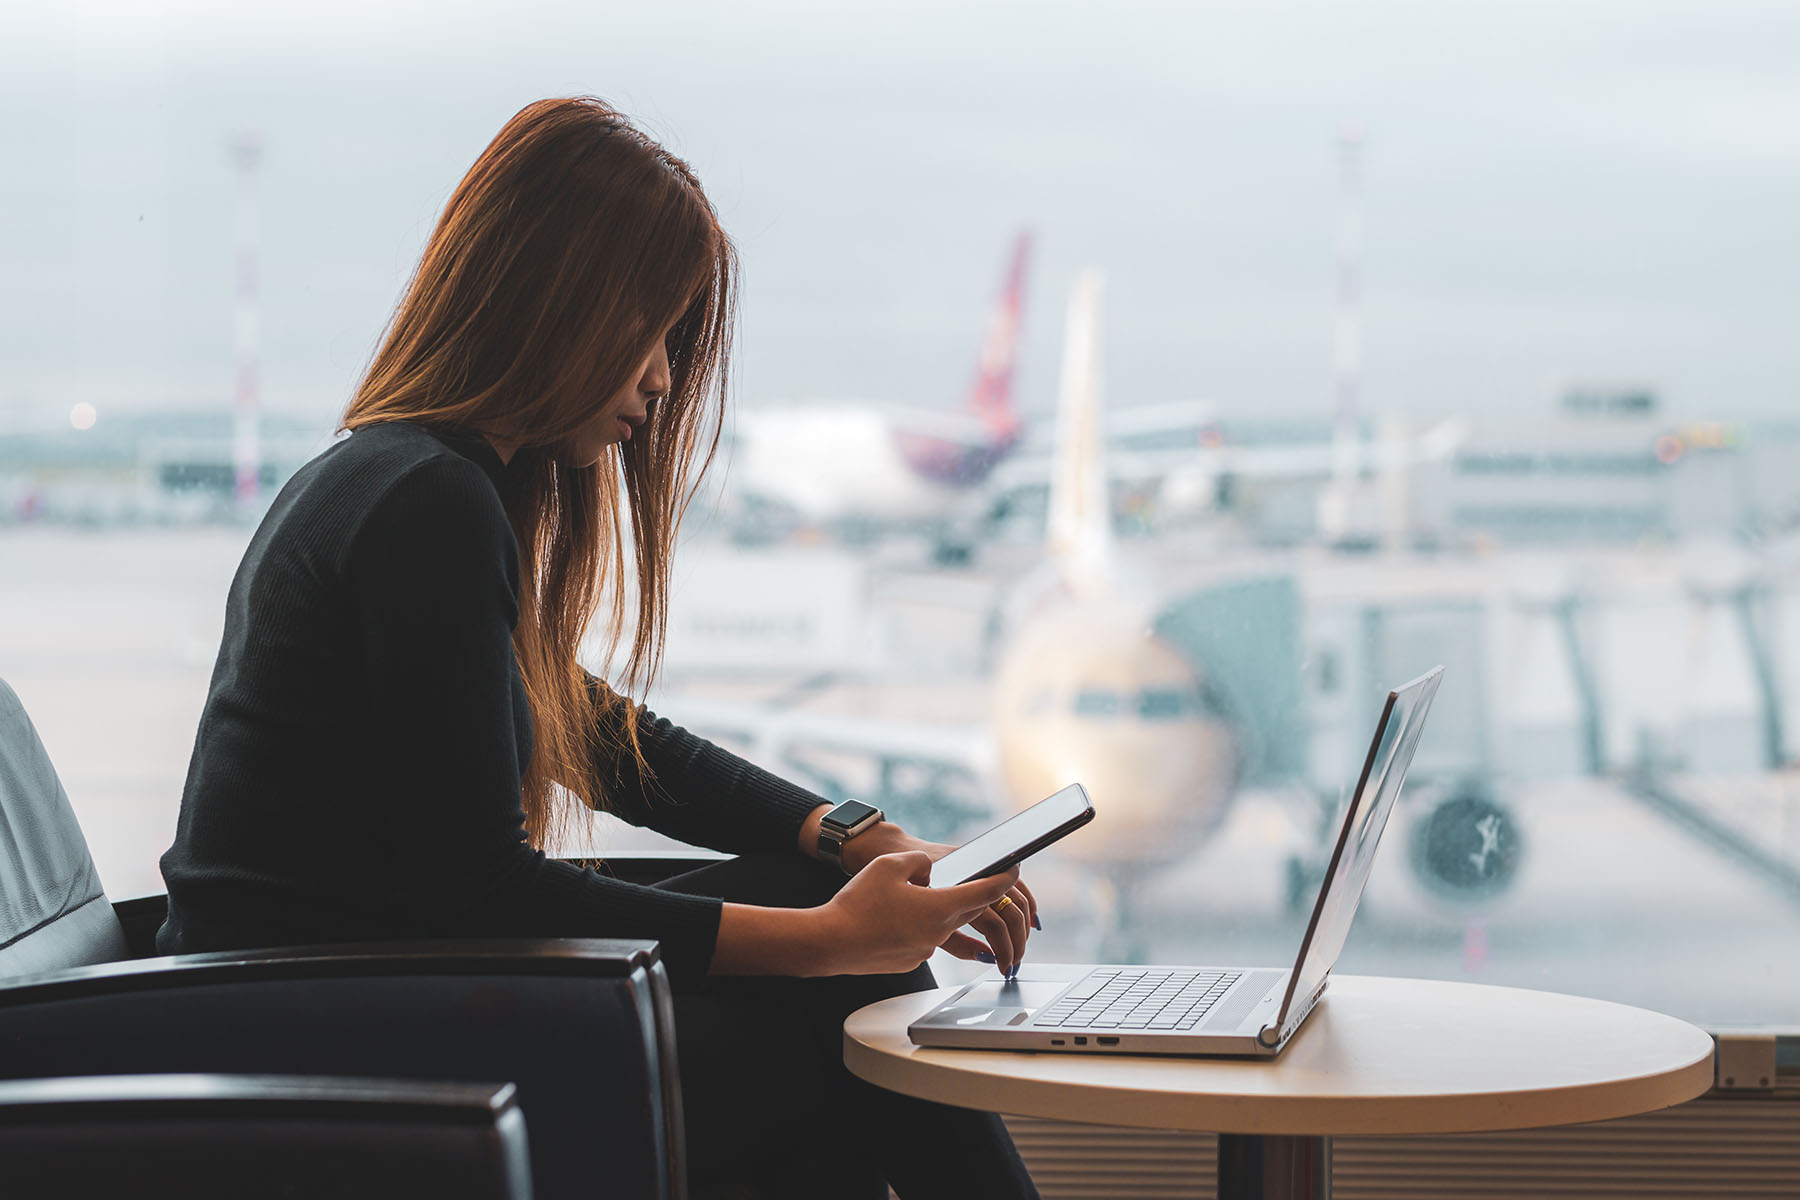 Woman working on laptop in airport hall. Planes are visible in the background.